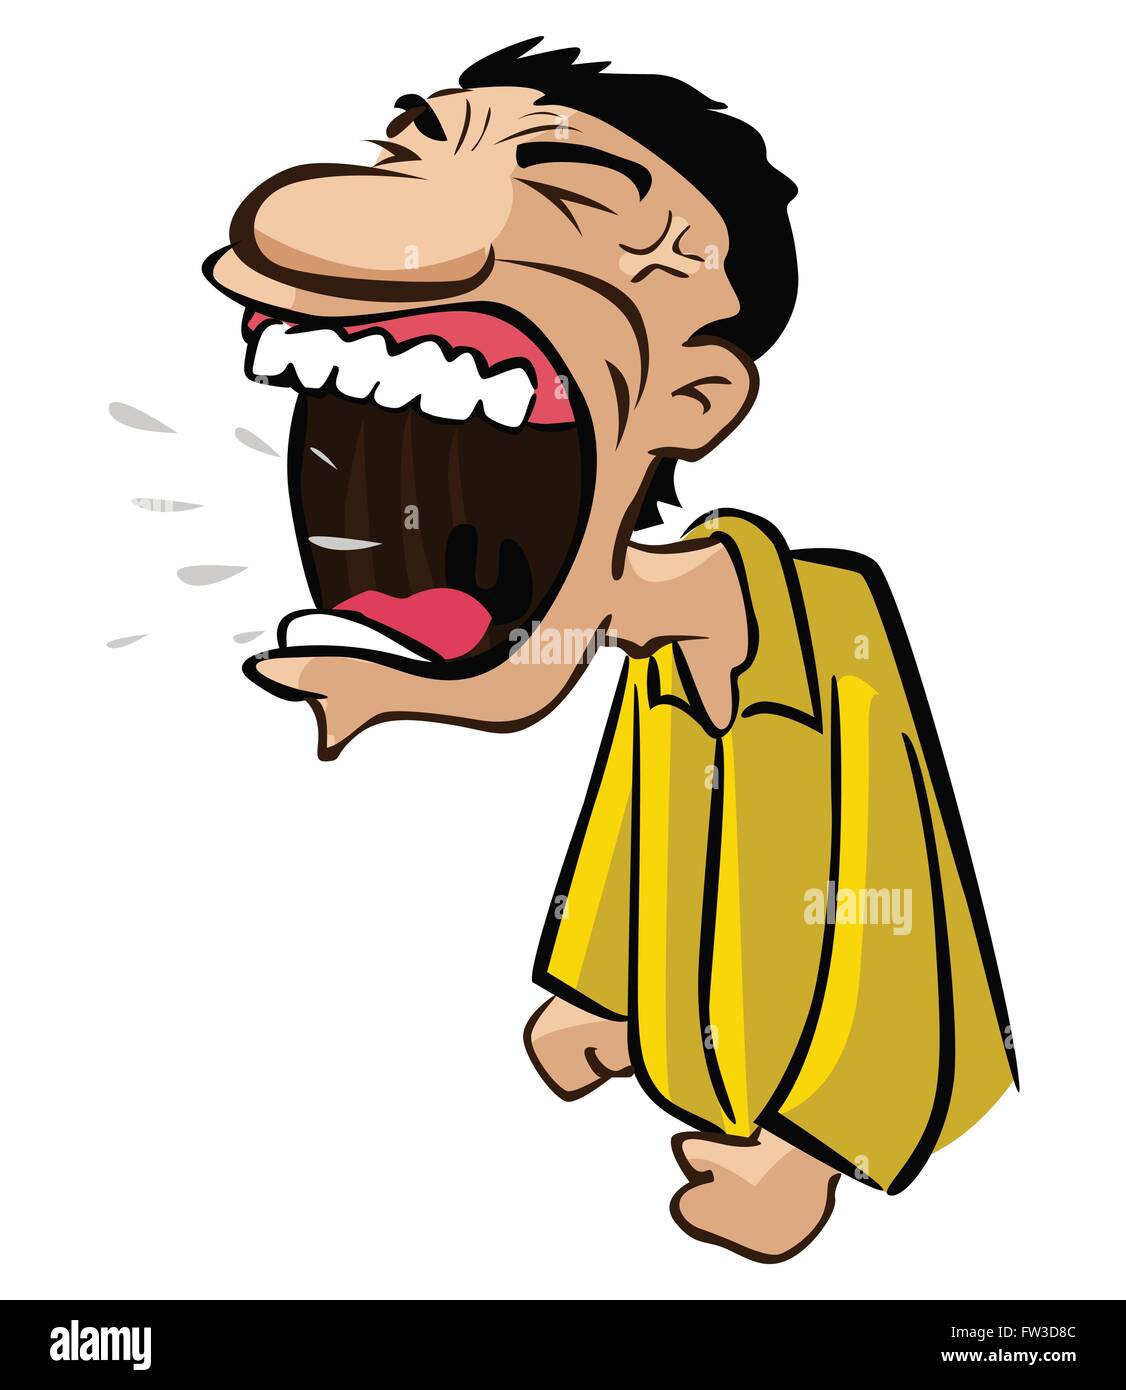 angry man with big shouting mouth Stock Vector